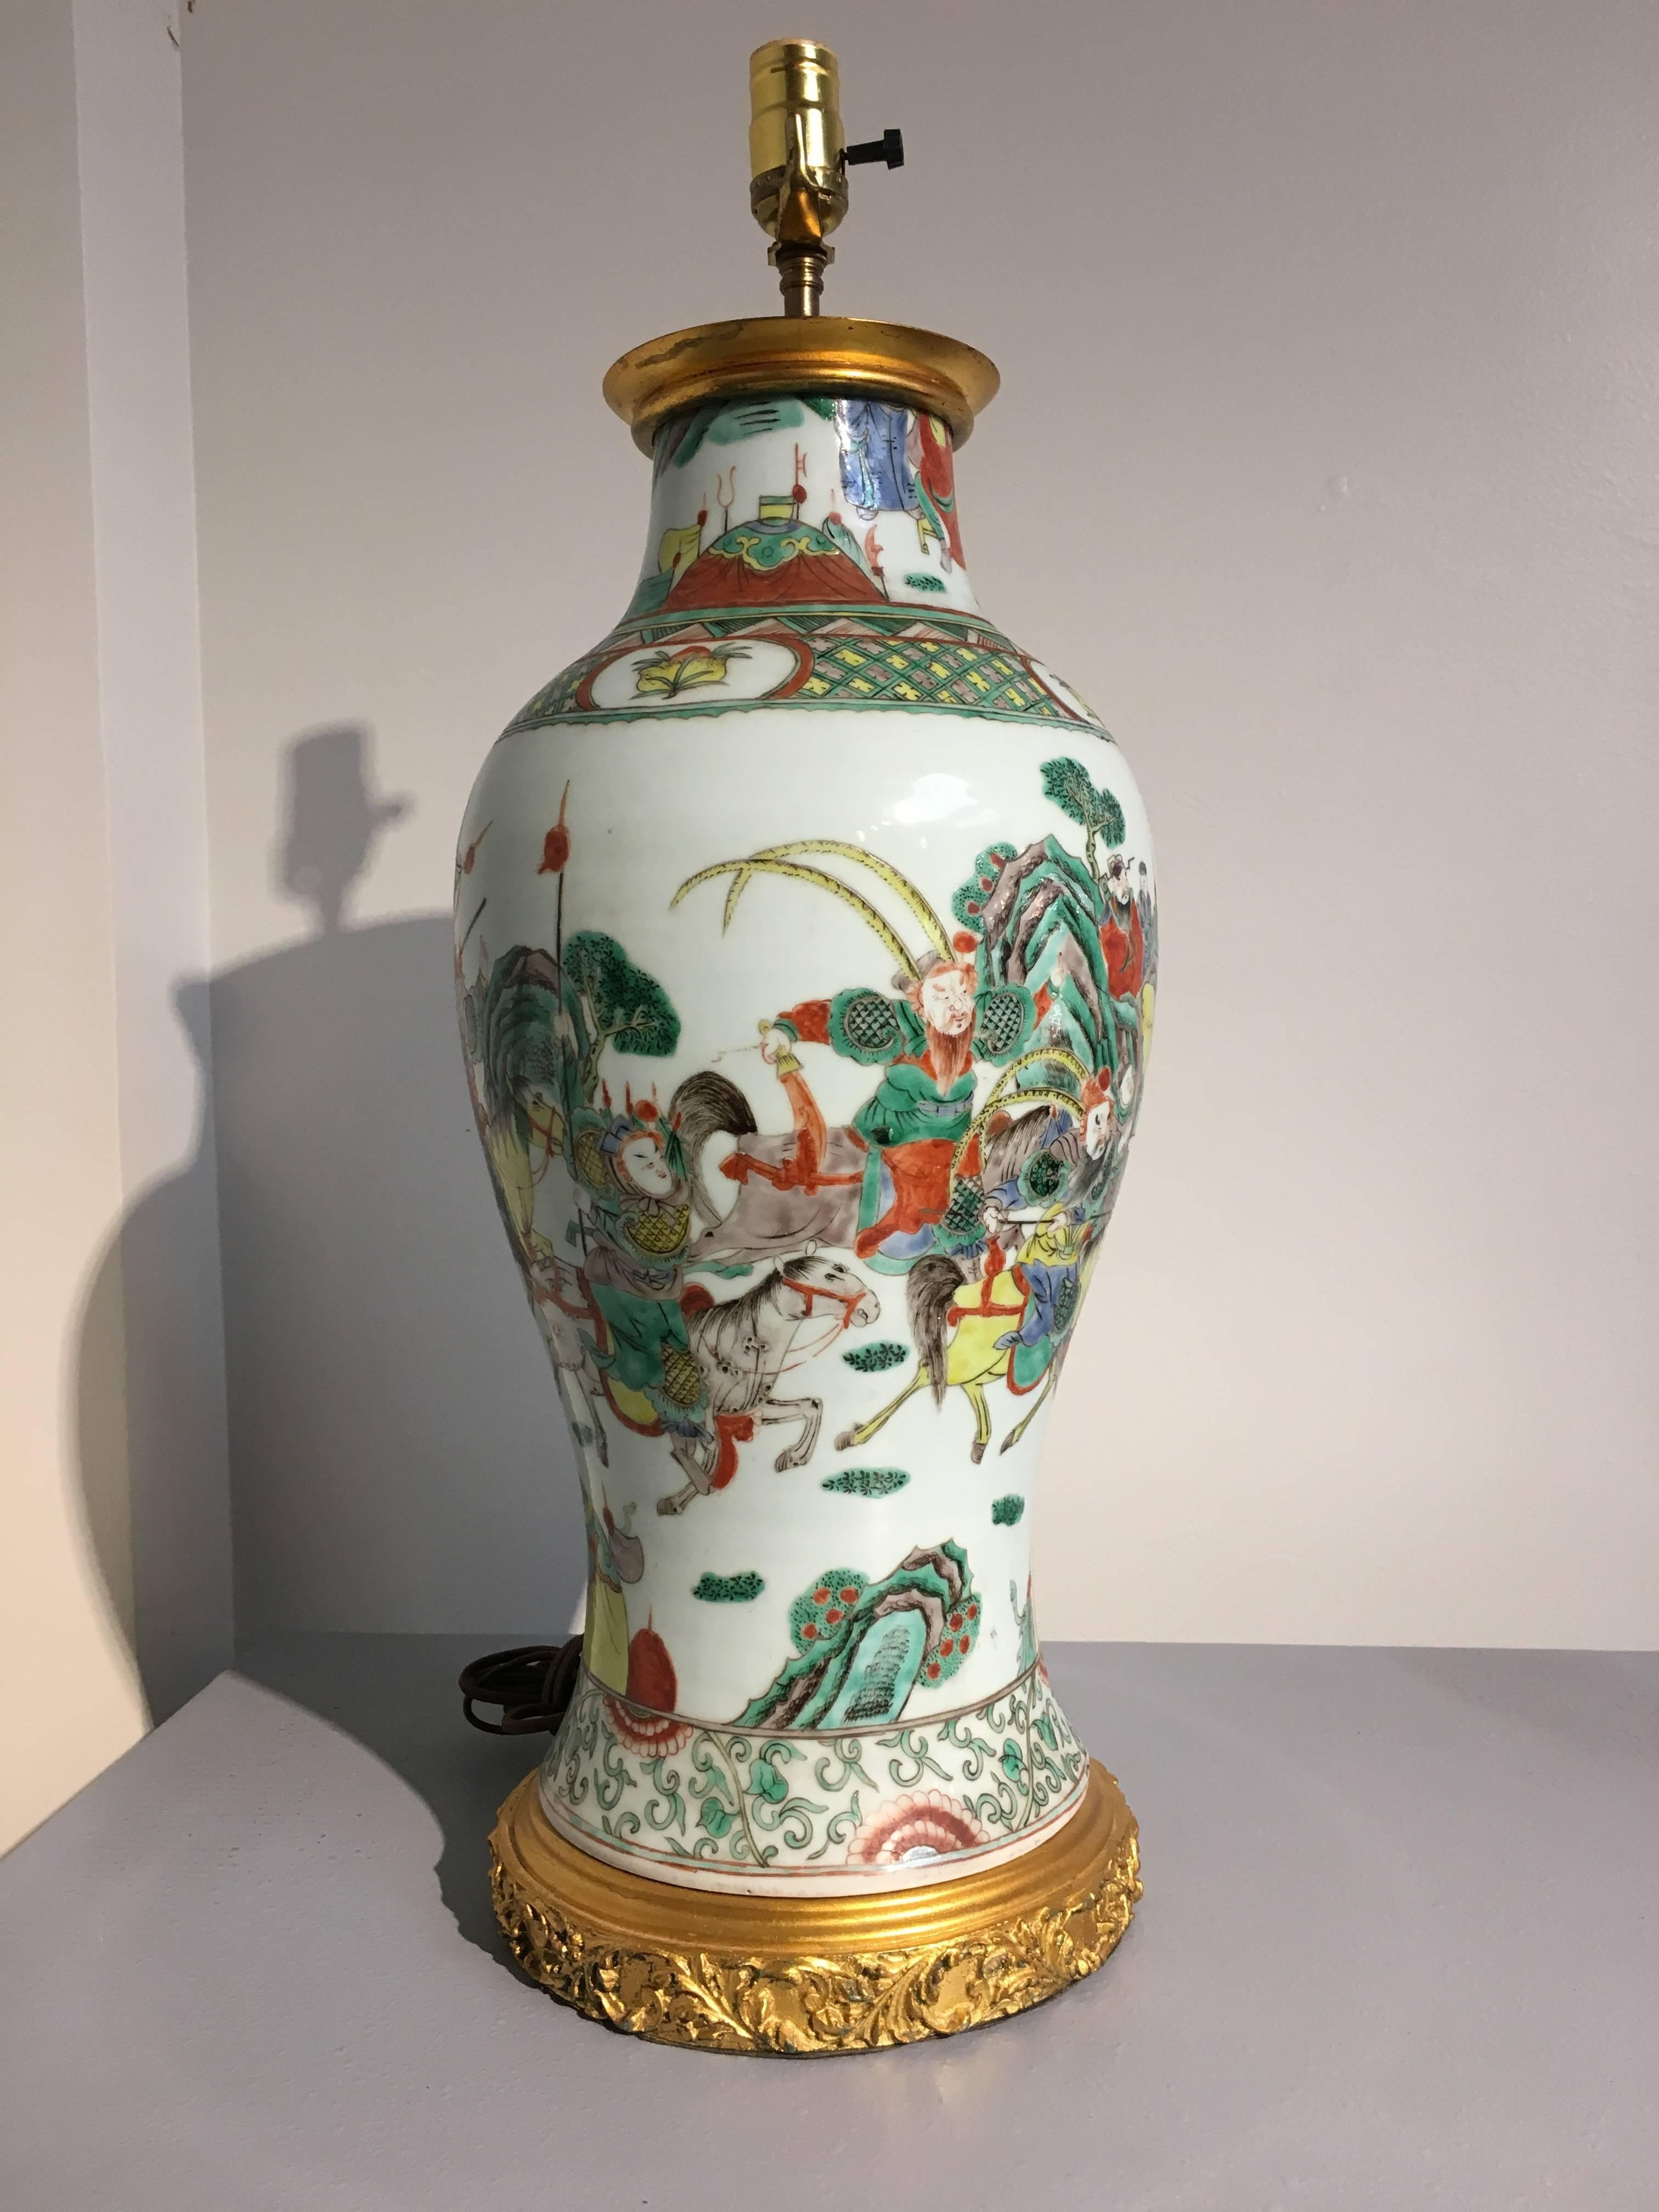 A large Chinese porcelain famille verte battle scene vase fitted with gilt metal mounts and converted into a lamp.
The vase of elegant baluster form. The porcelain body well painted in vibrant famille verte enamels with a lively battle scene